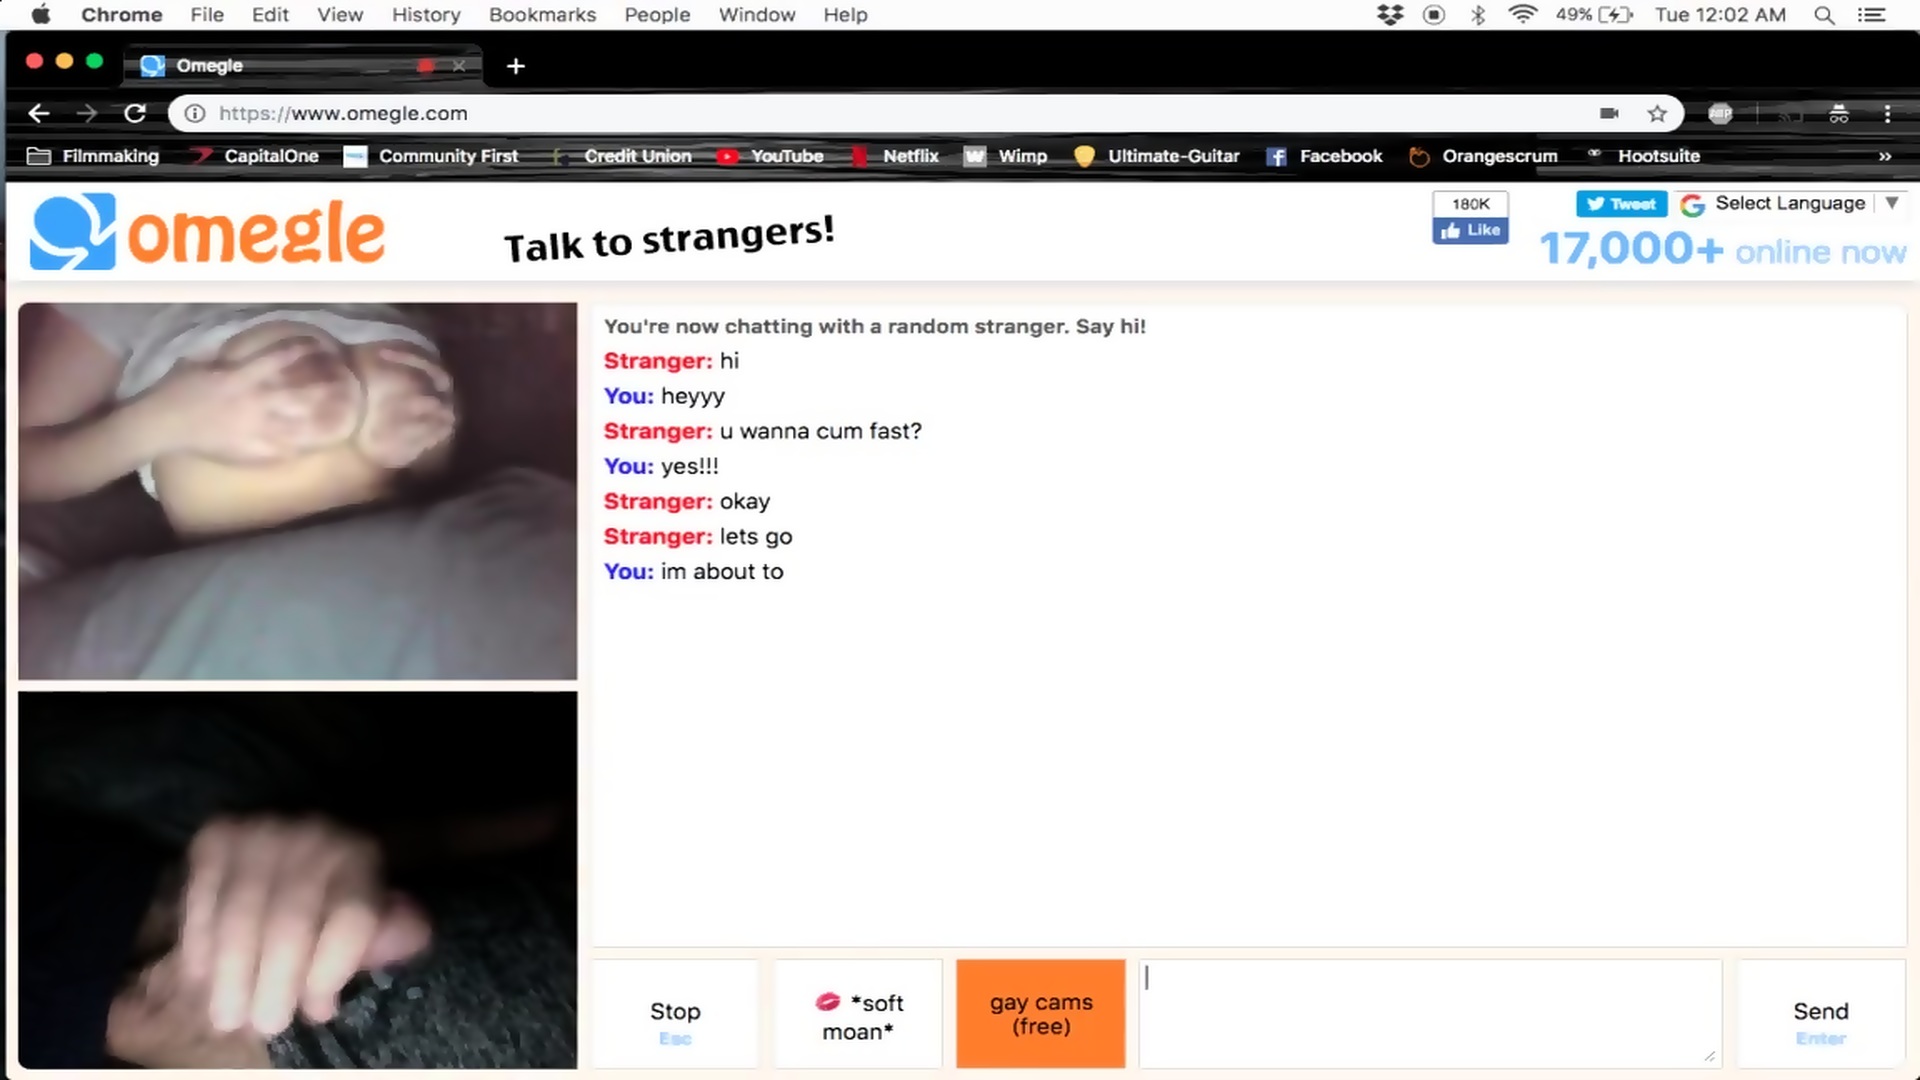 20 omegle feet pics that will drive you wild